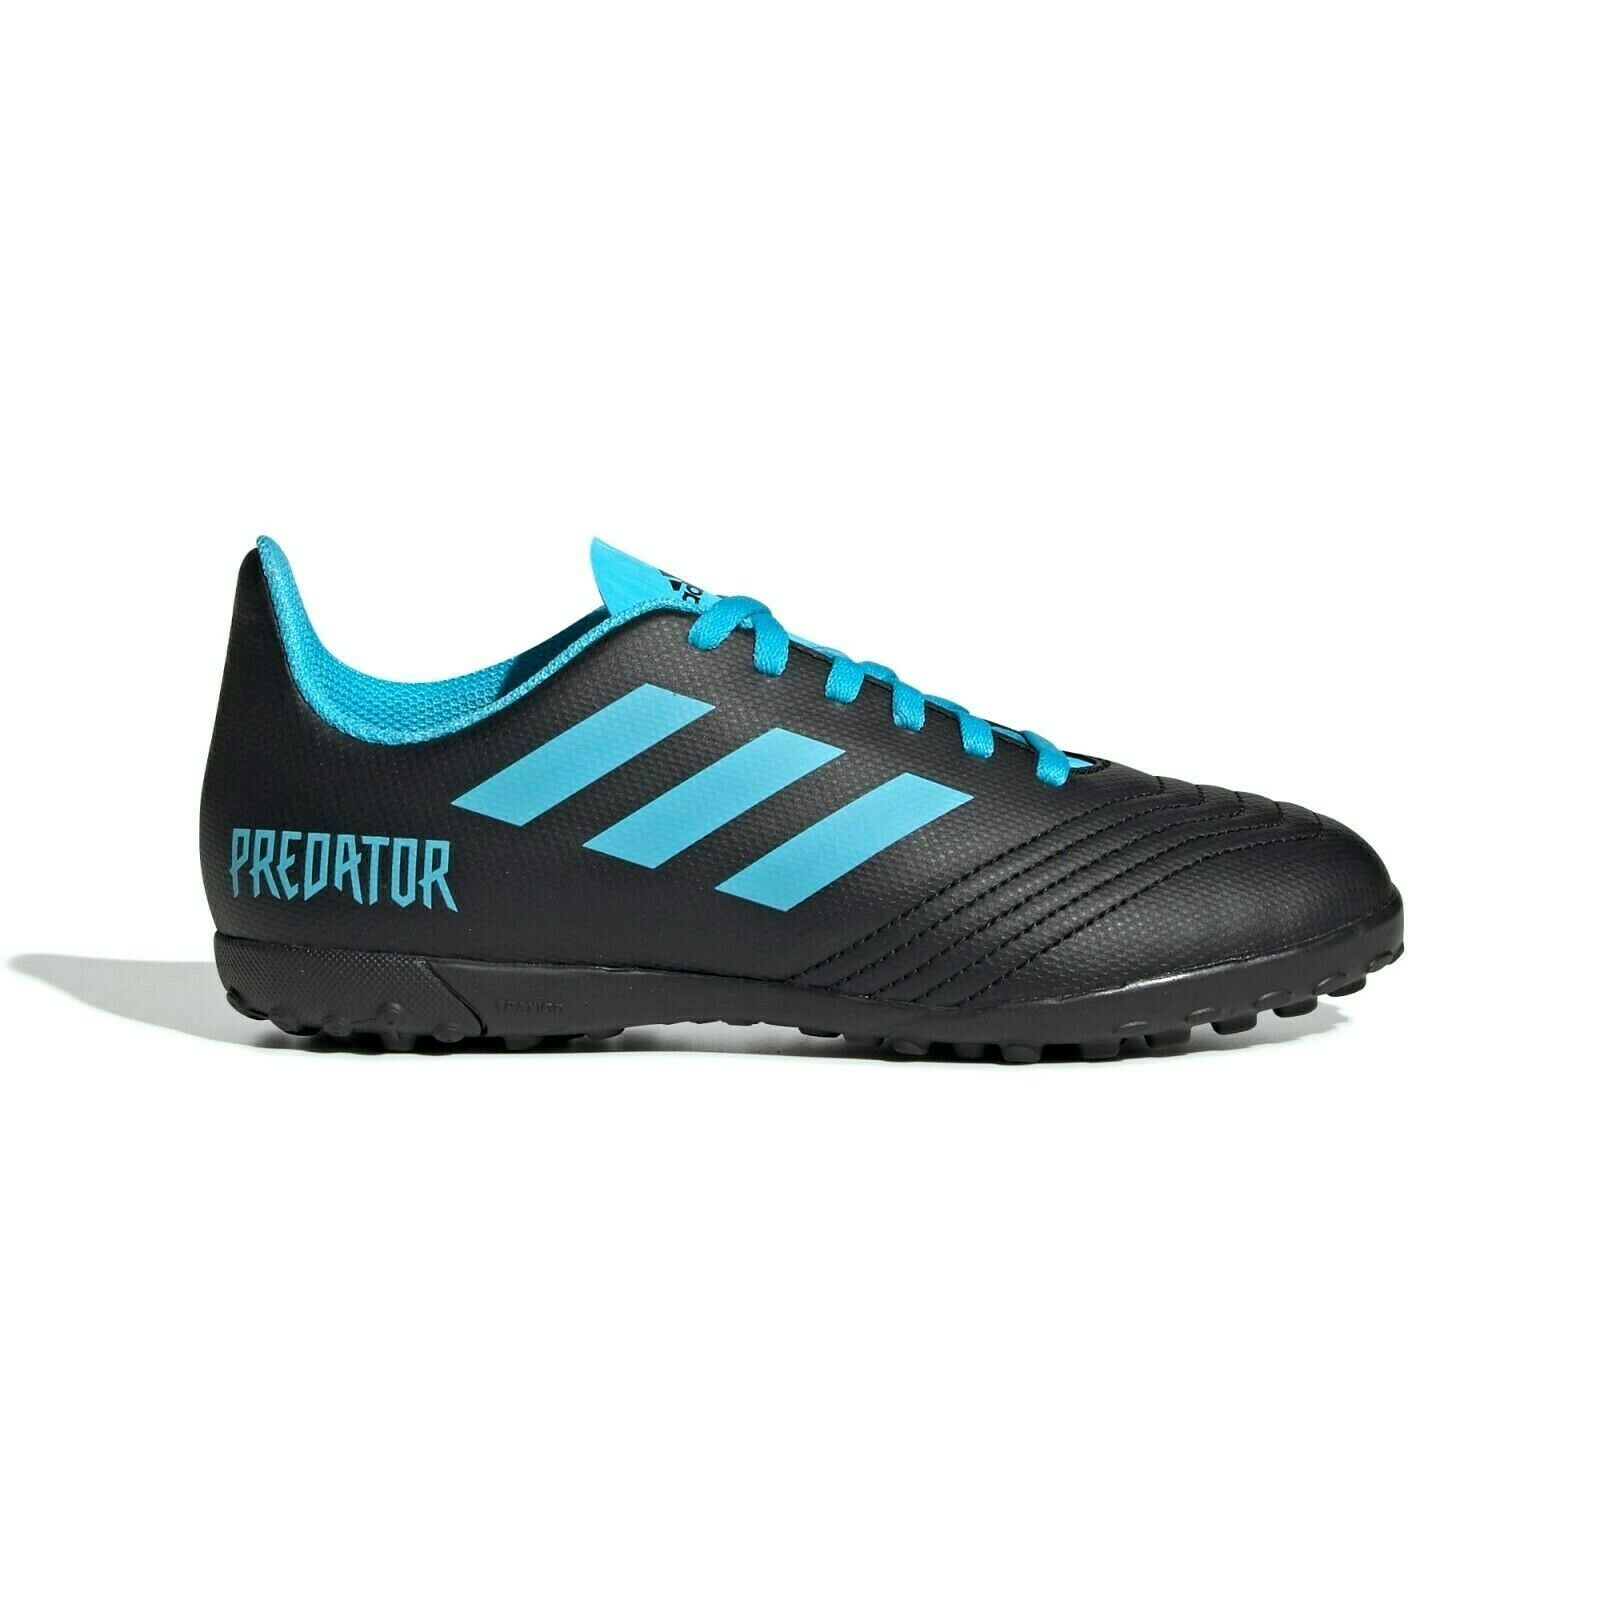 adidas youth turf soccer shoes